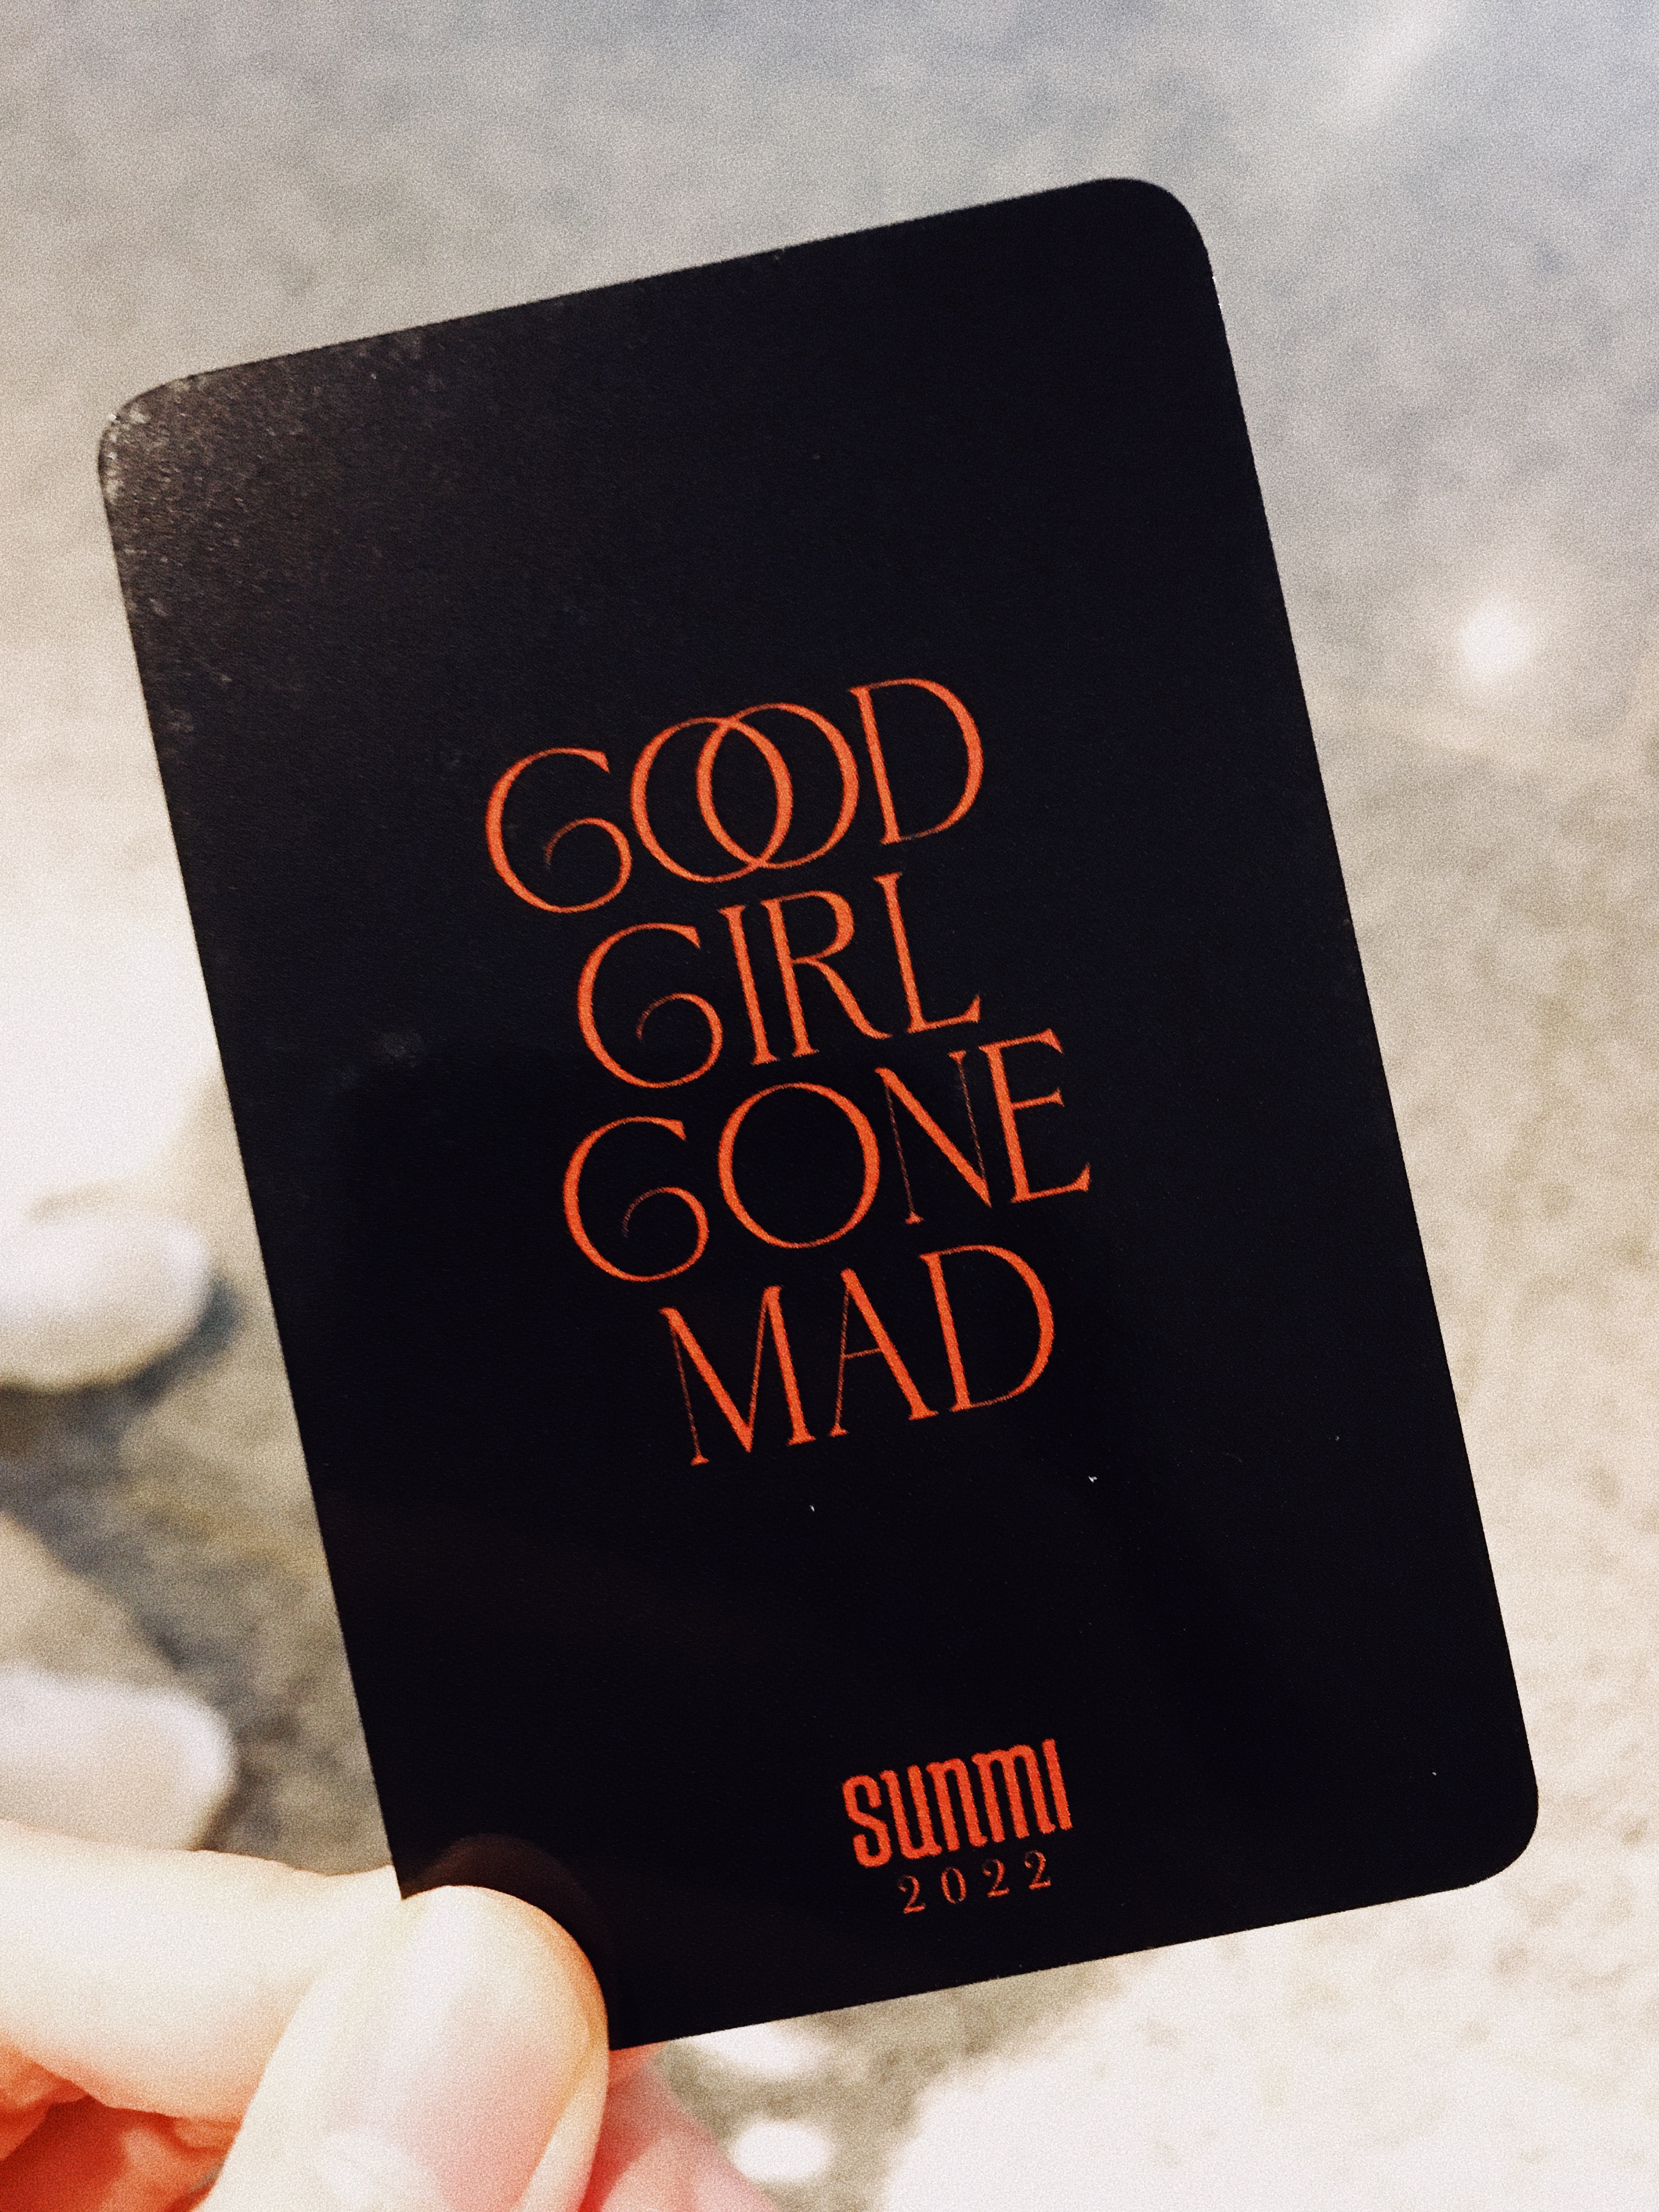 Holding a concert photocard that reads 'Good Girl Gone Mad.